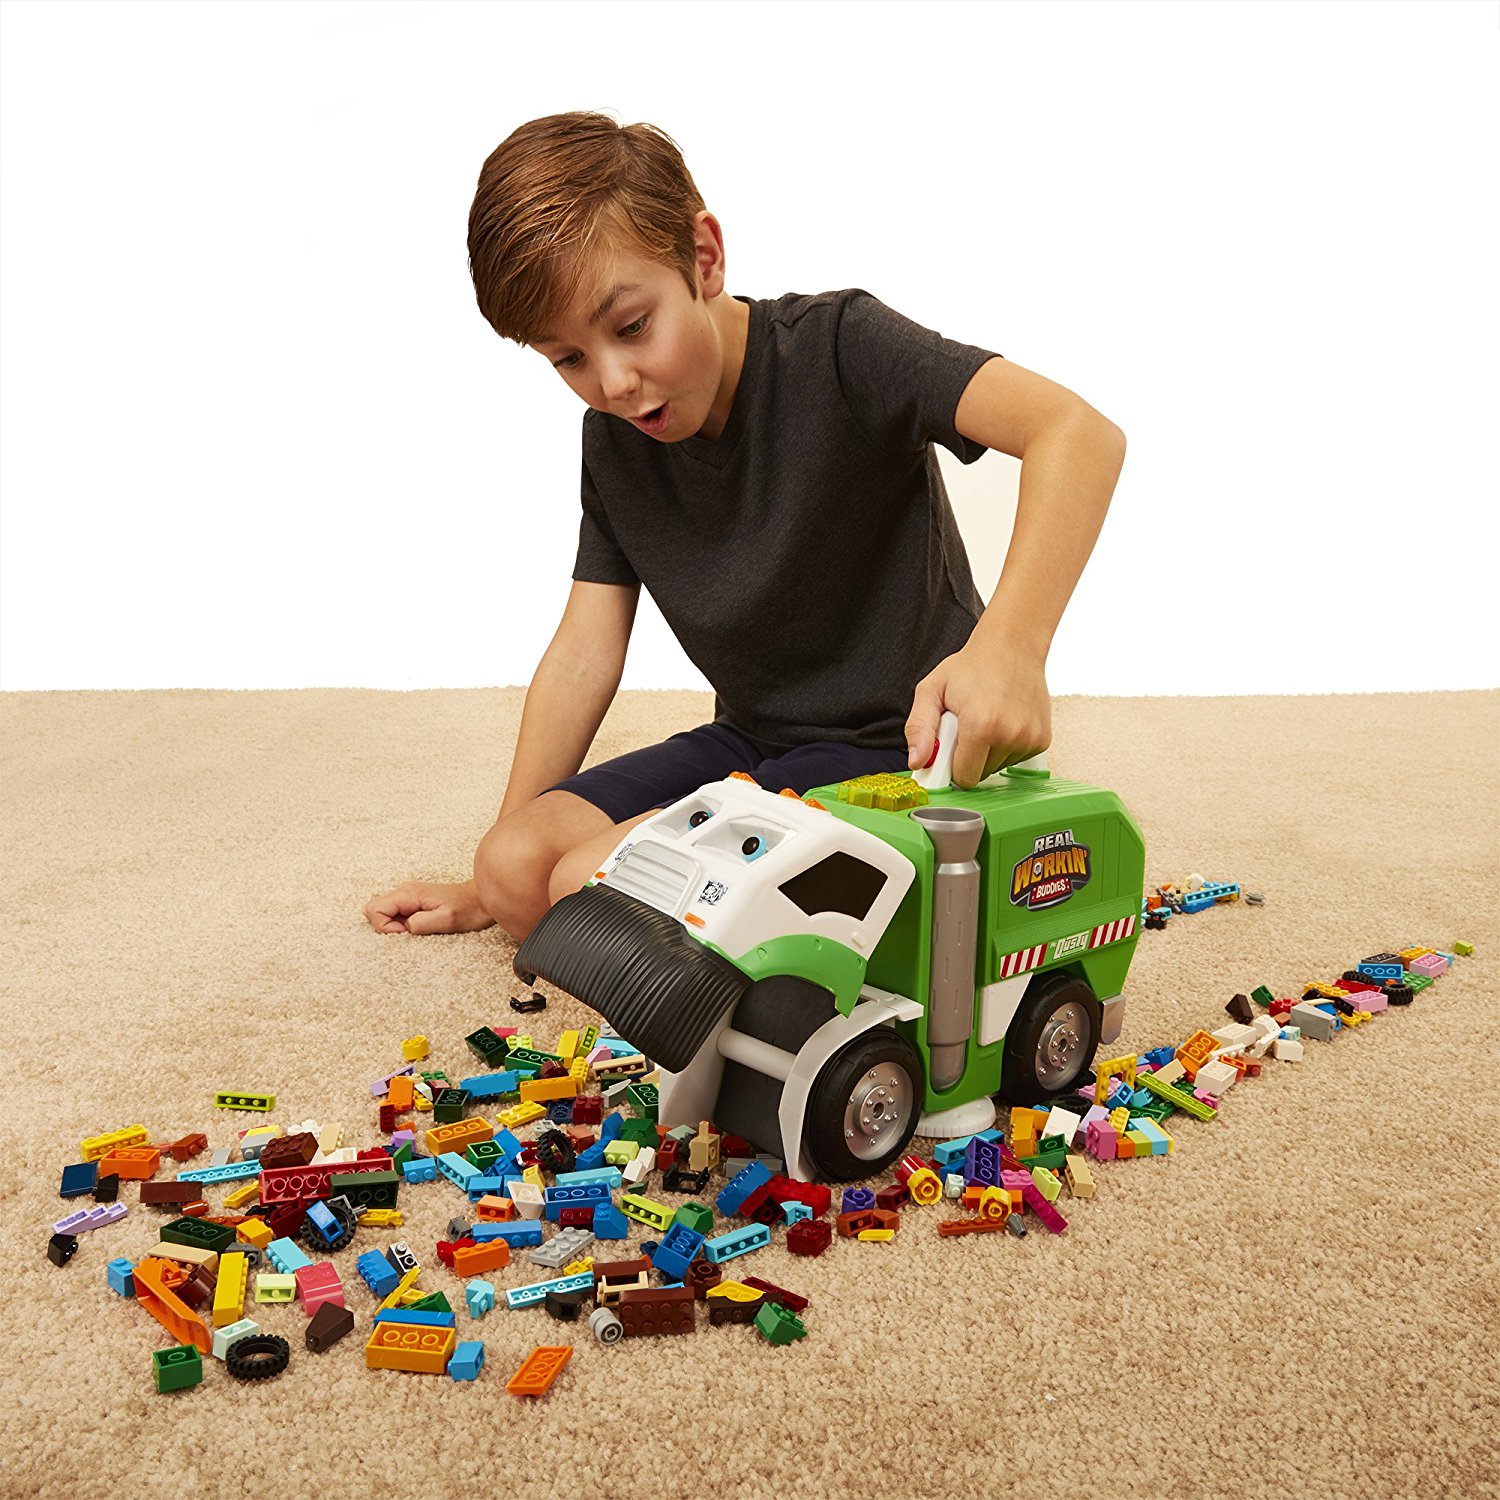 Real Workin Buddies: Mr. Dusty The Super Duper Toy Eating Garbage Truck—$27.99!